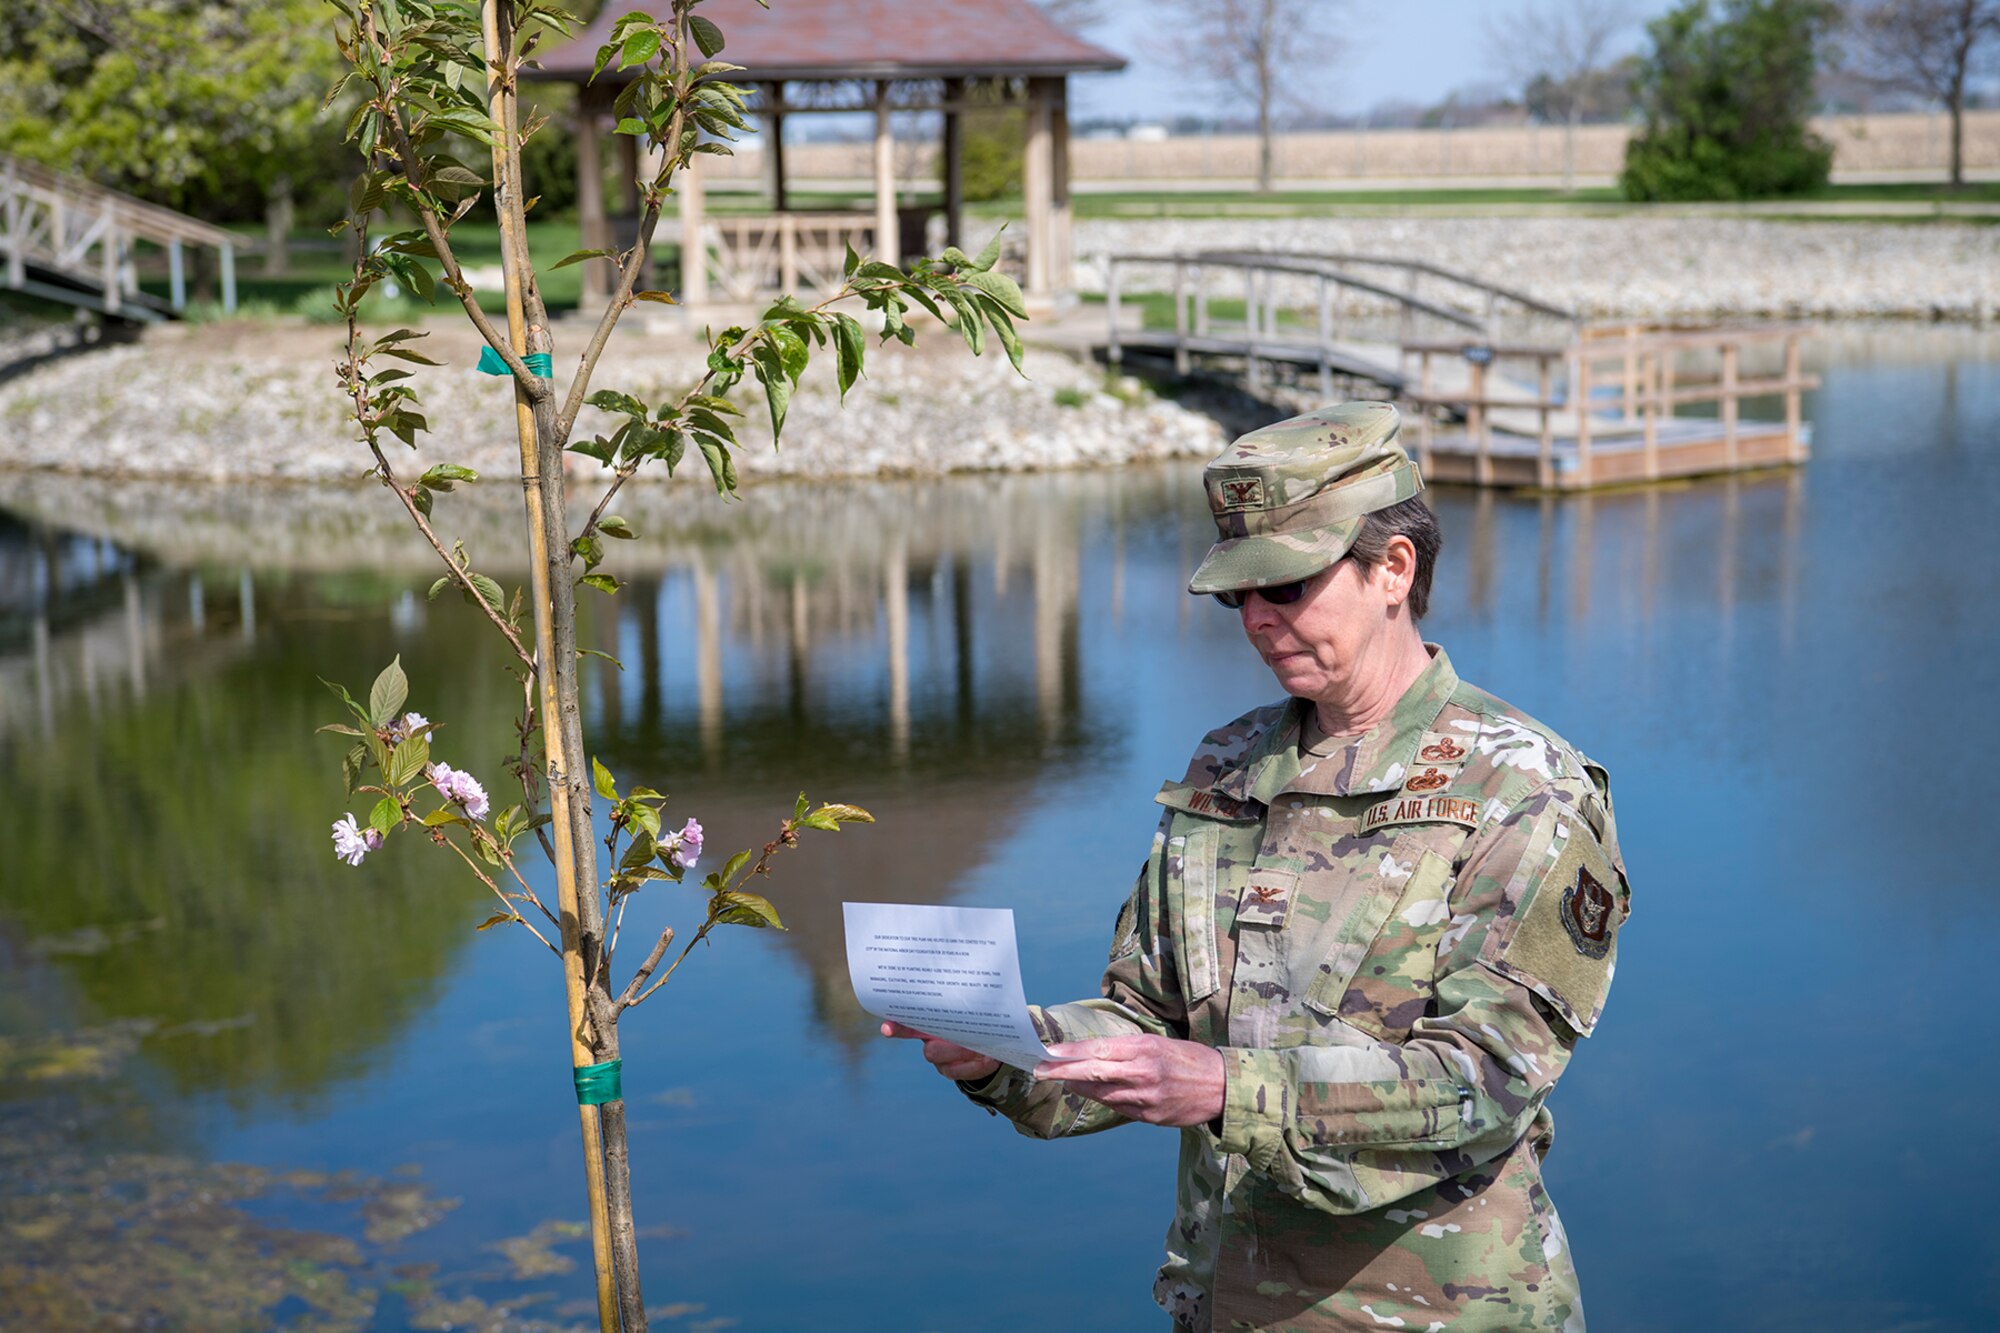 Col. Gretchen Wiltse, 434th Mission Support Group commander, speaks during a tree planting ceremony held here April 23, 2021. Grissom planted a cherry tree to celebrate Arbor Day. (U.S. Air Force photo/Douglas Hays)